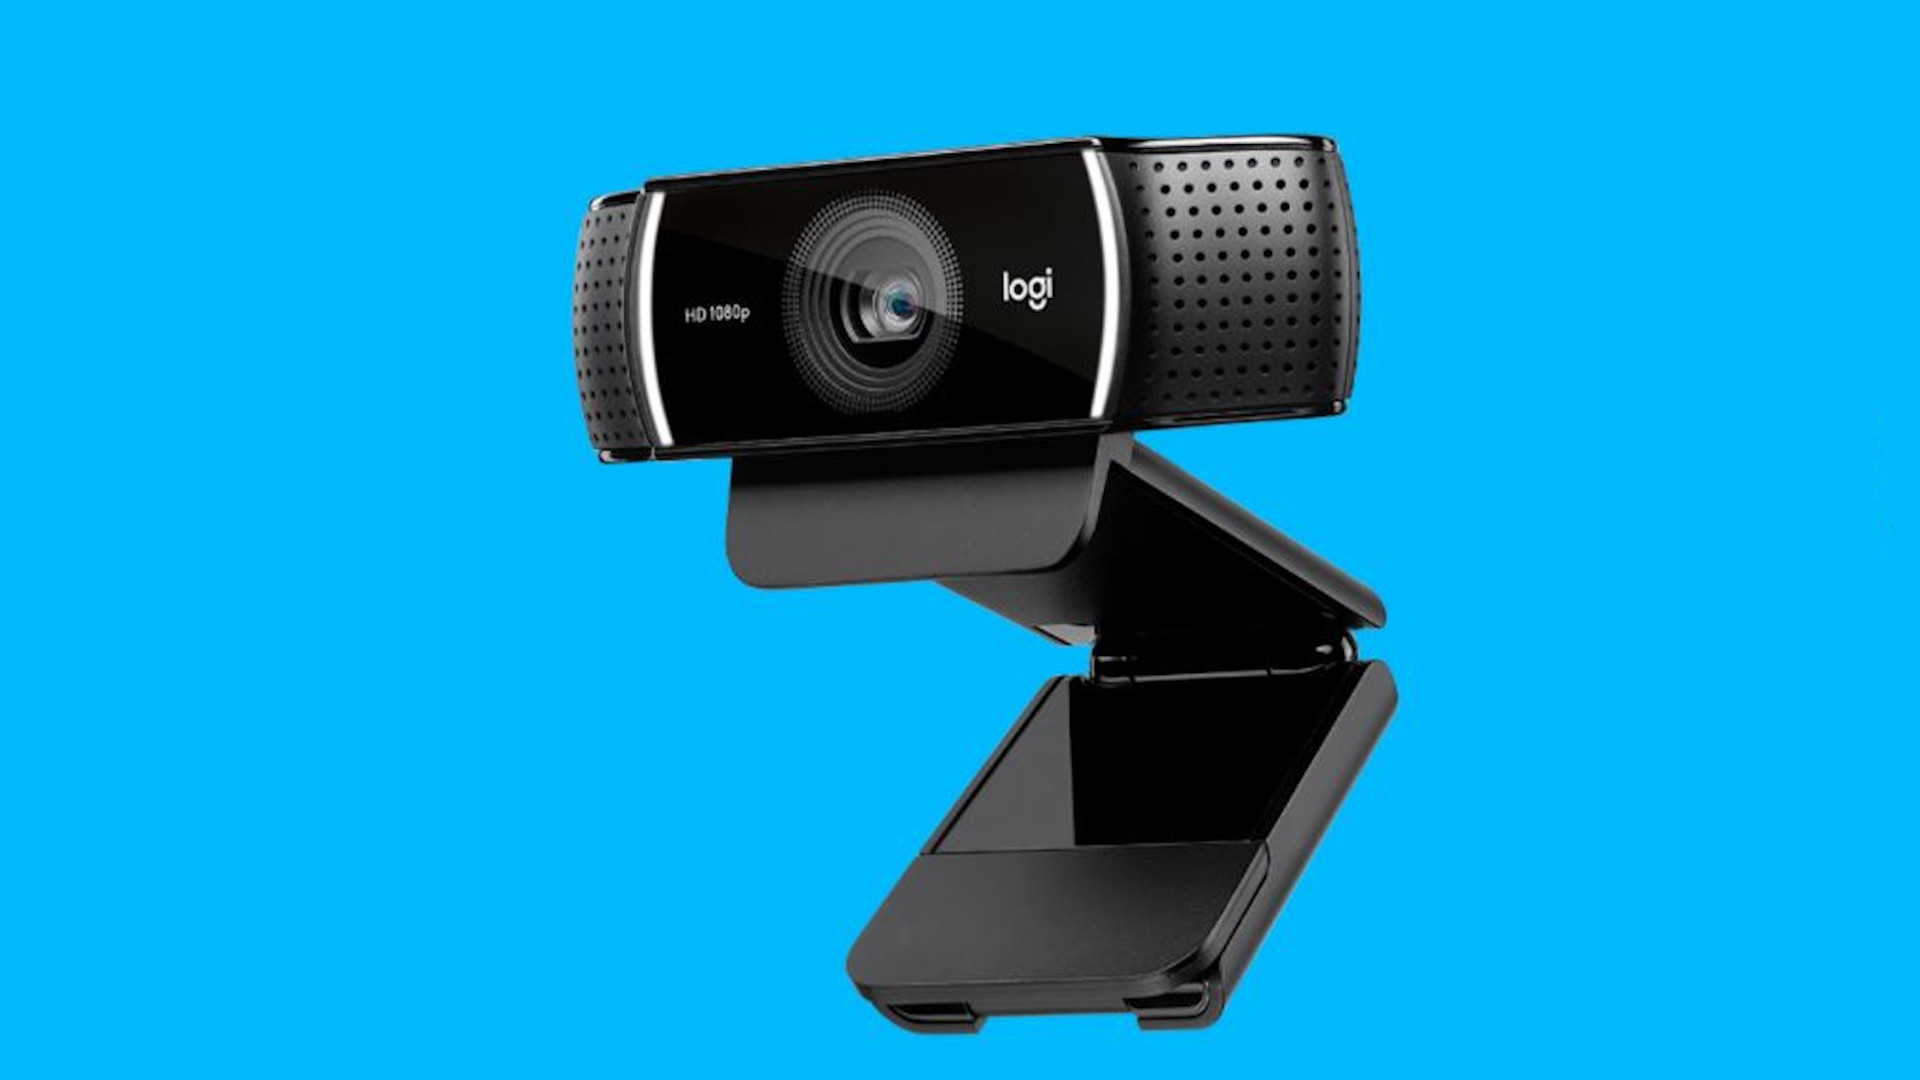 Best webcams for streaming in 2021 | The Loadout